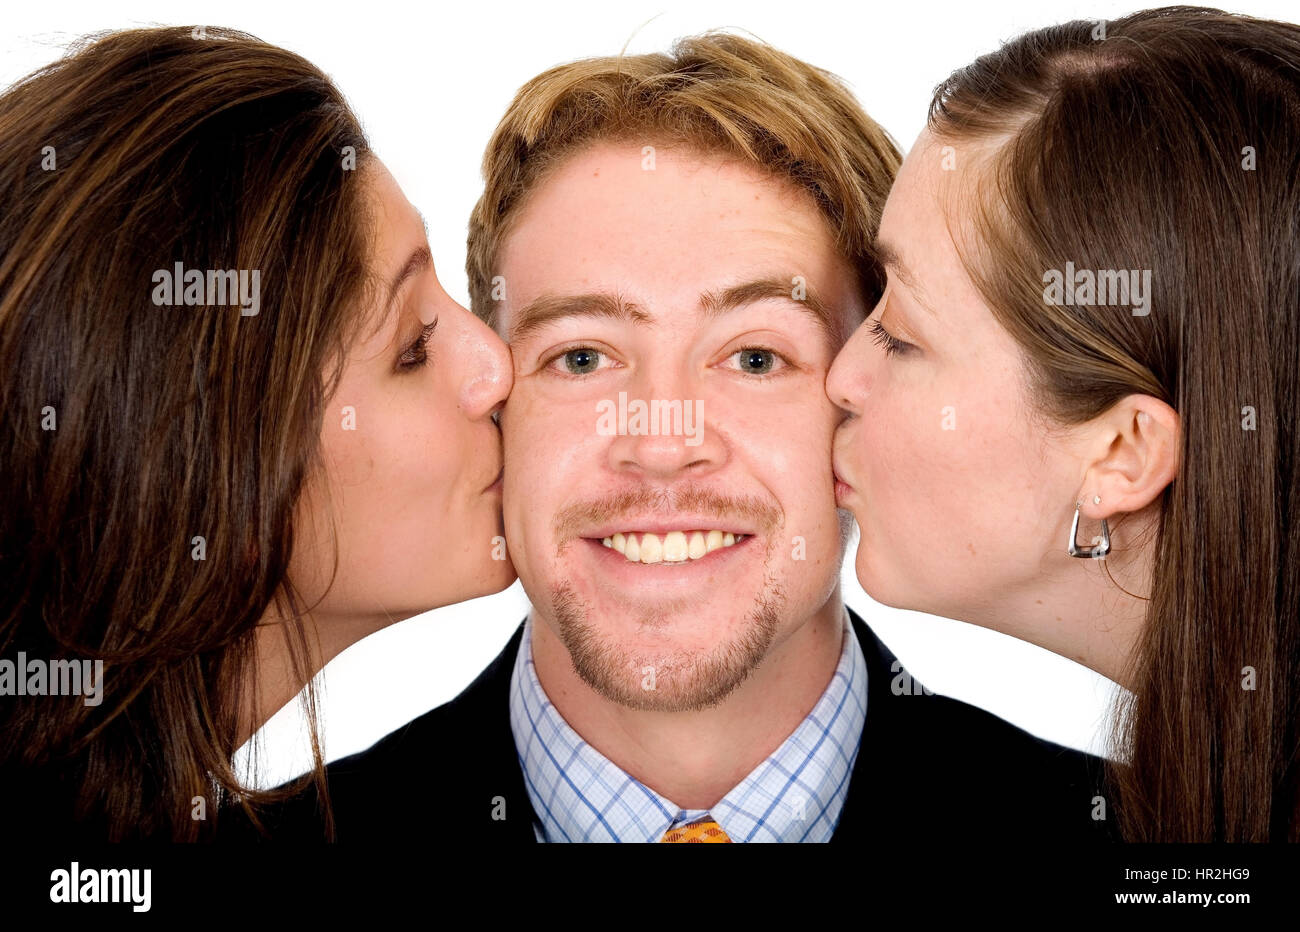 Business Man With Two Girls Kissing Him At The Same Time Isolated Over A White Background Stock